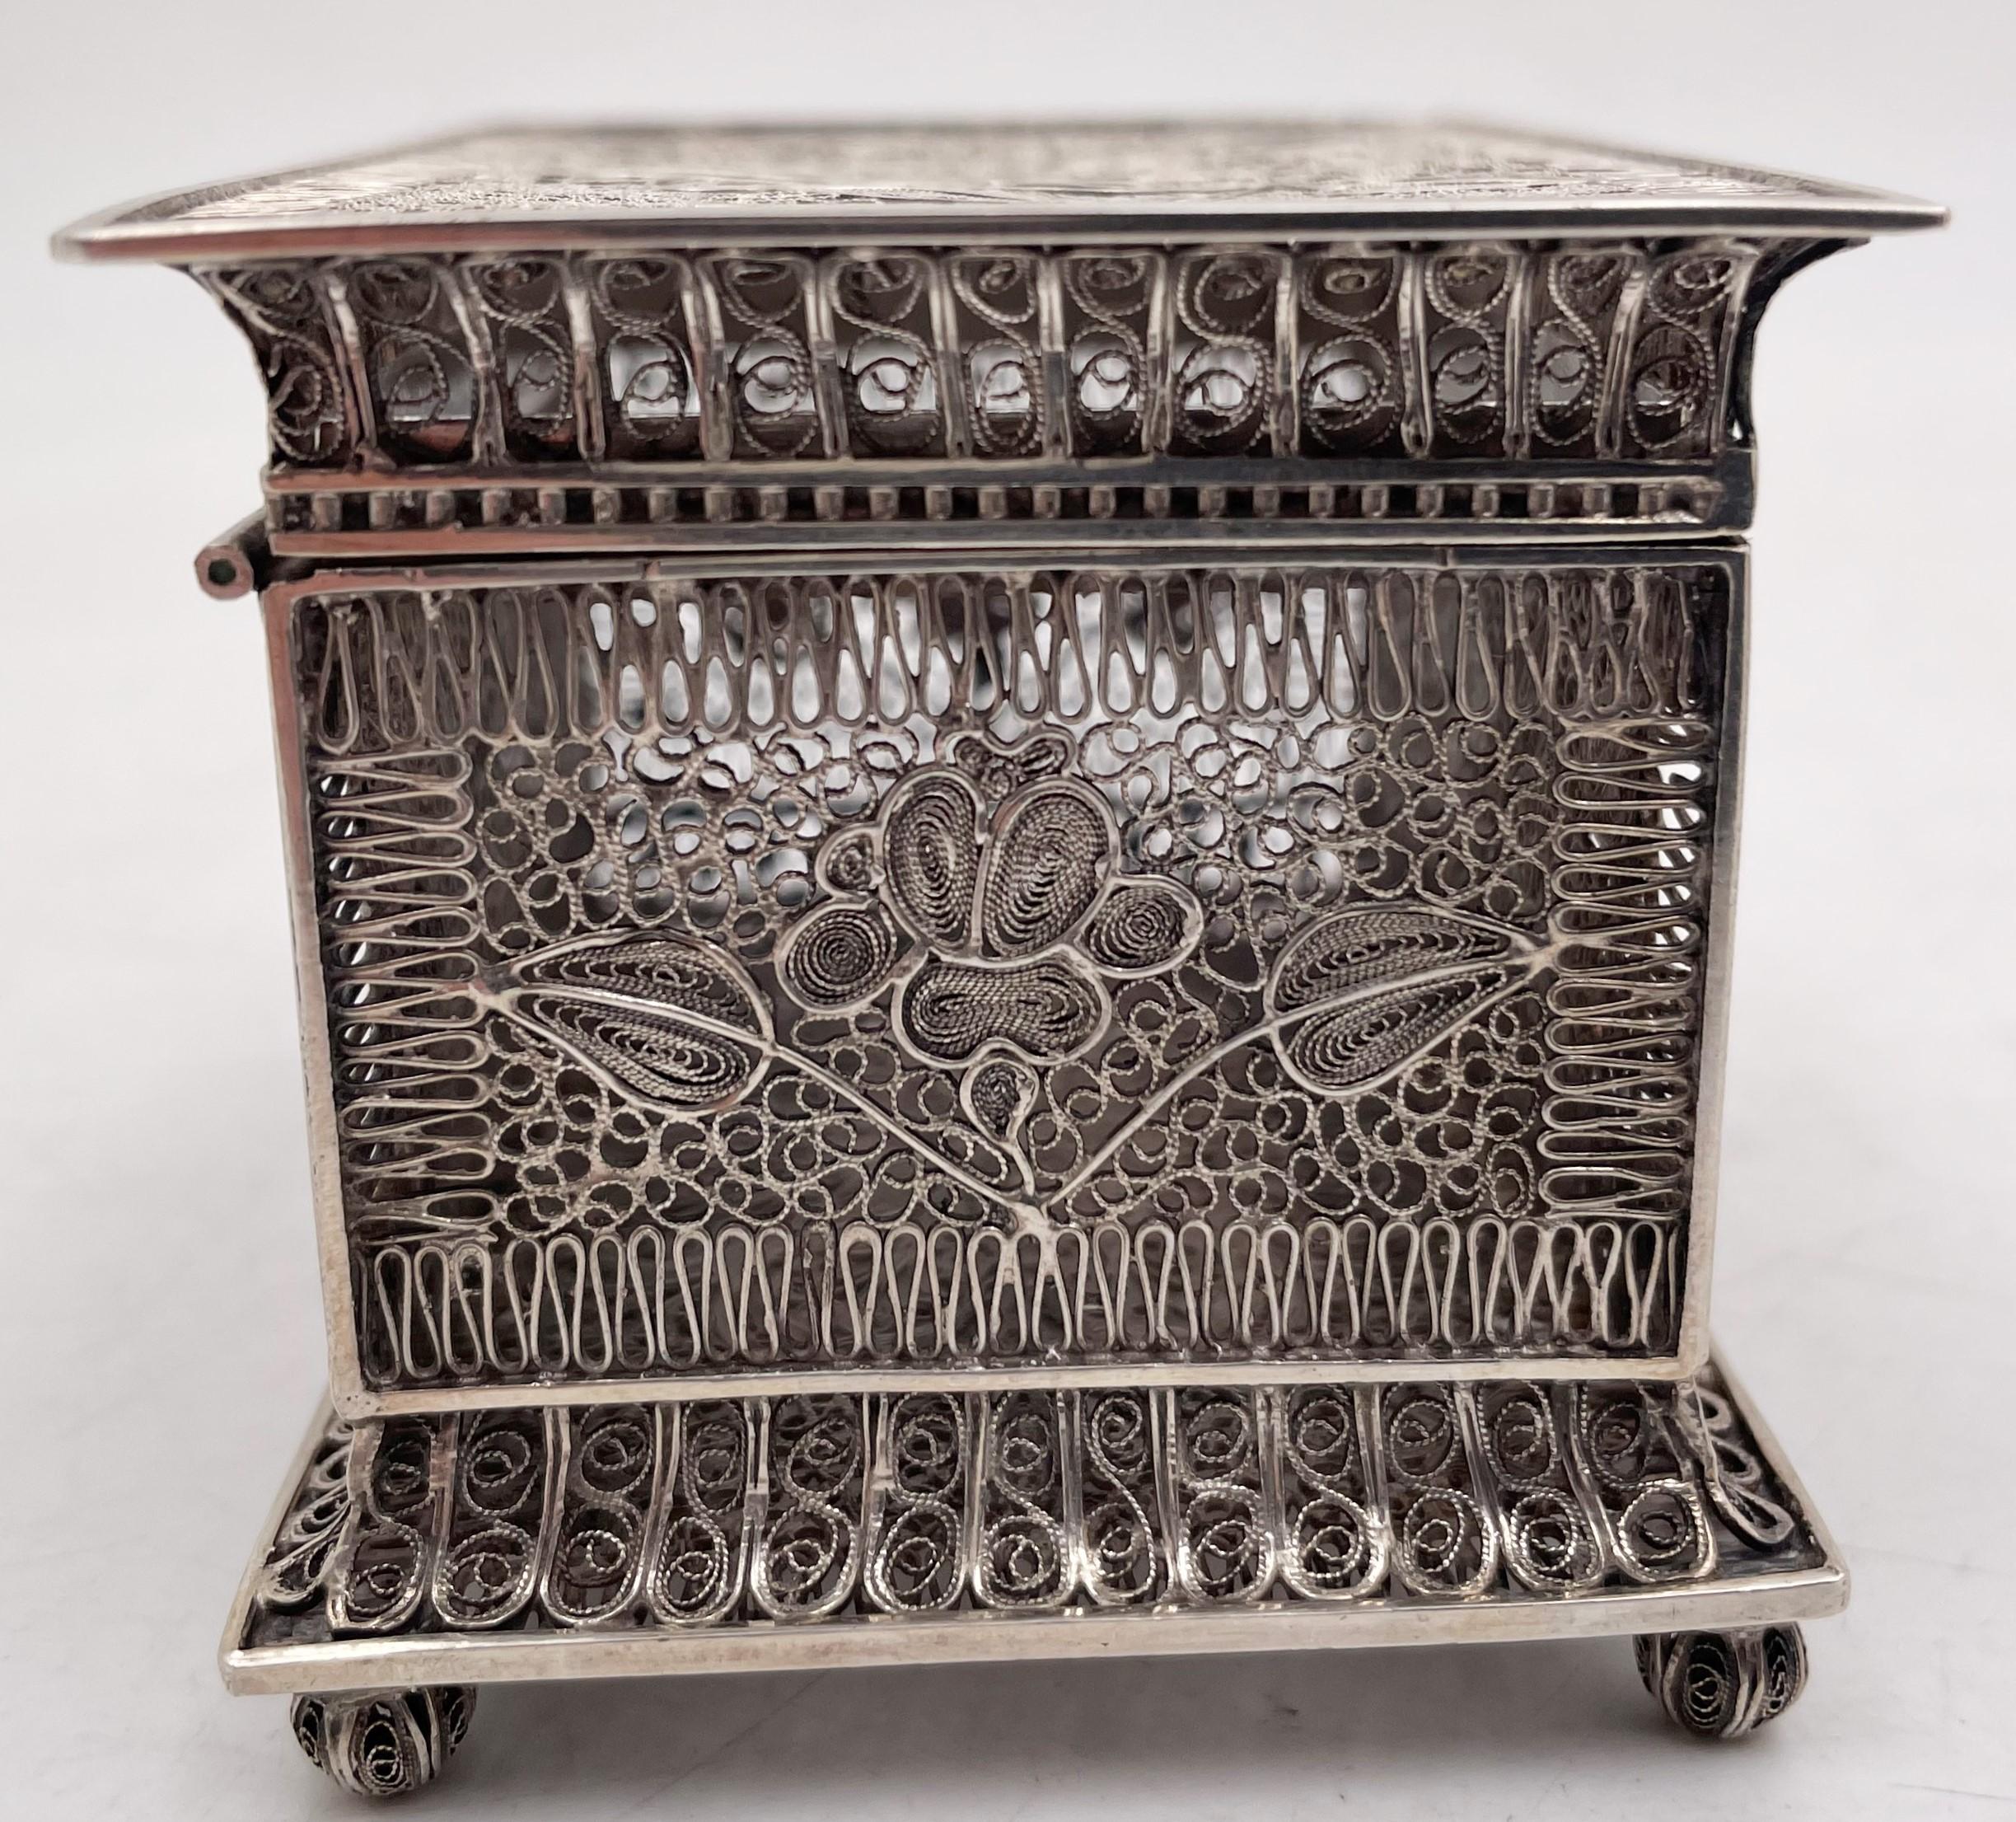 Filigree Early 20th Century Silver Box with Floral Motifs For Sale 1